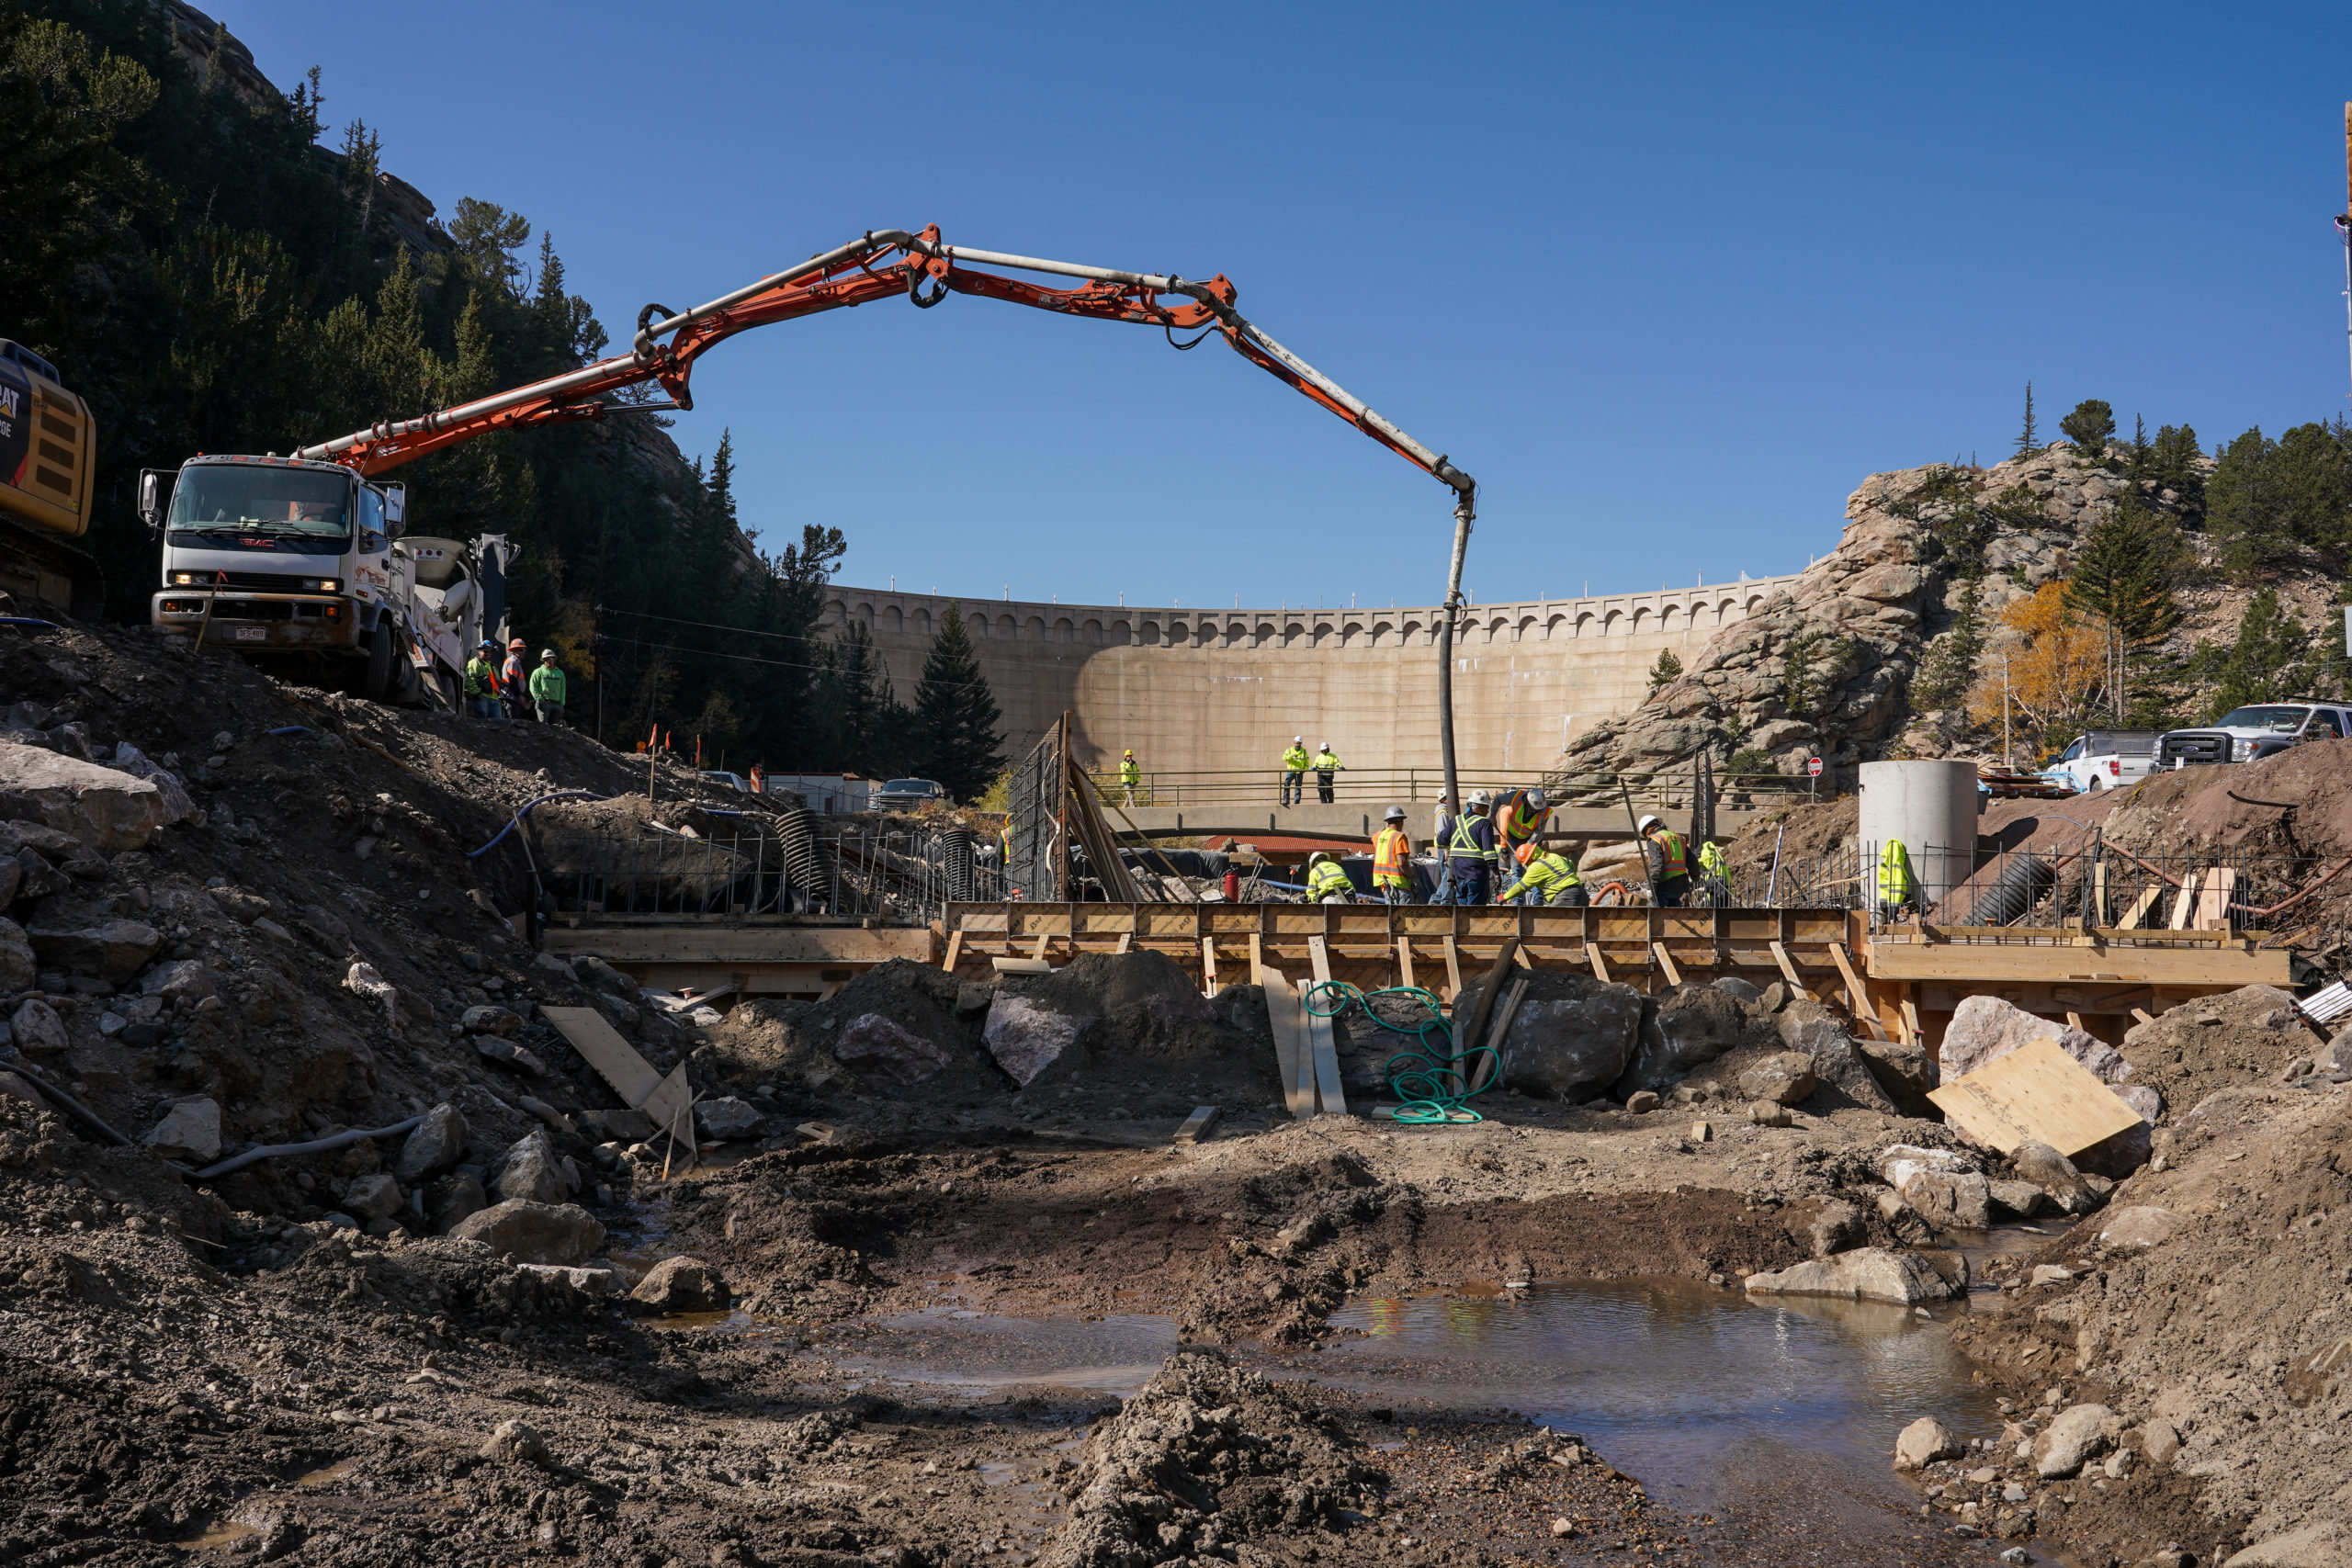 Workers construct the new flume on the downstream side of the dam in October 2020. Photo credit: Denver Water.